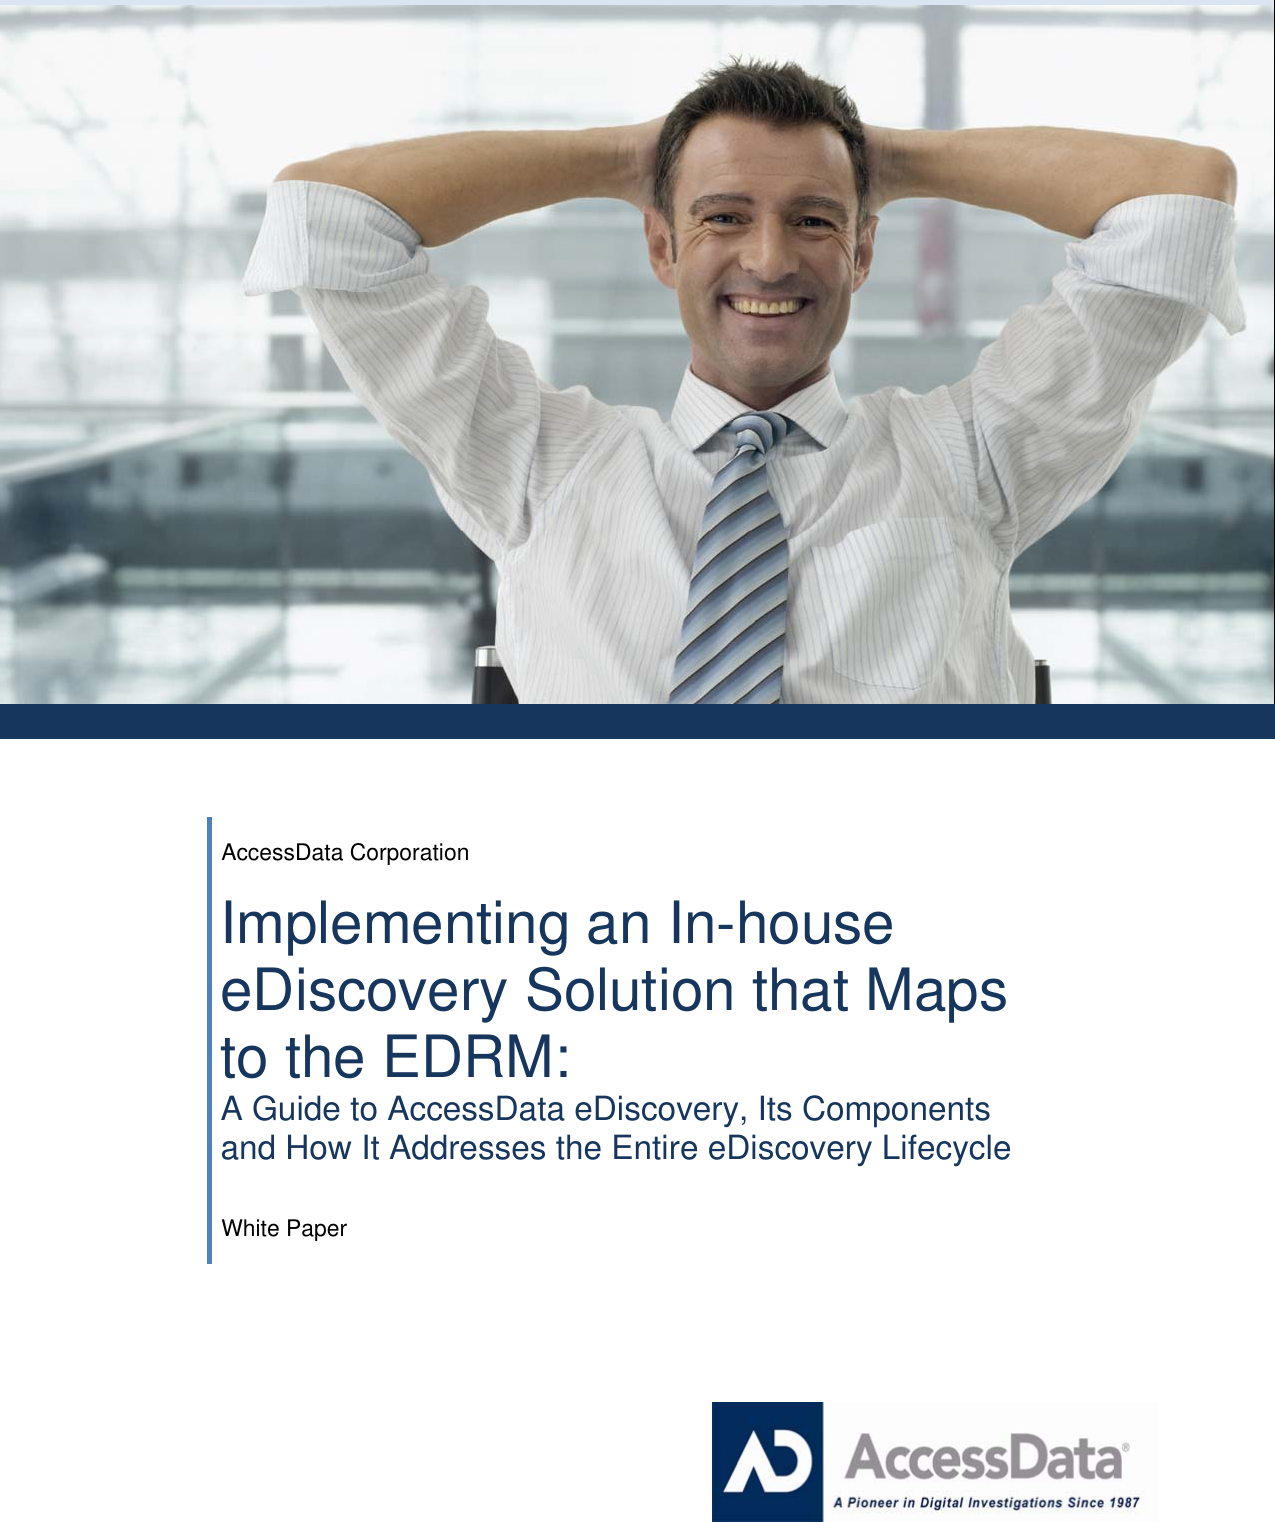 Page 1 of 12 - Guide To AccessData EDiscovery_MapsEDRM_3-4-10[1]  AD E Discovery Implementing In-House Solution Maps EDRM